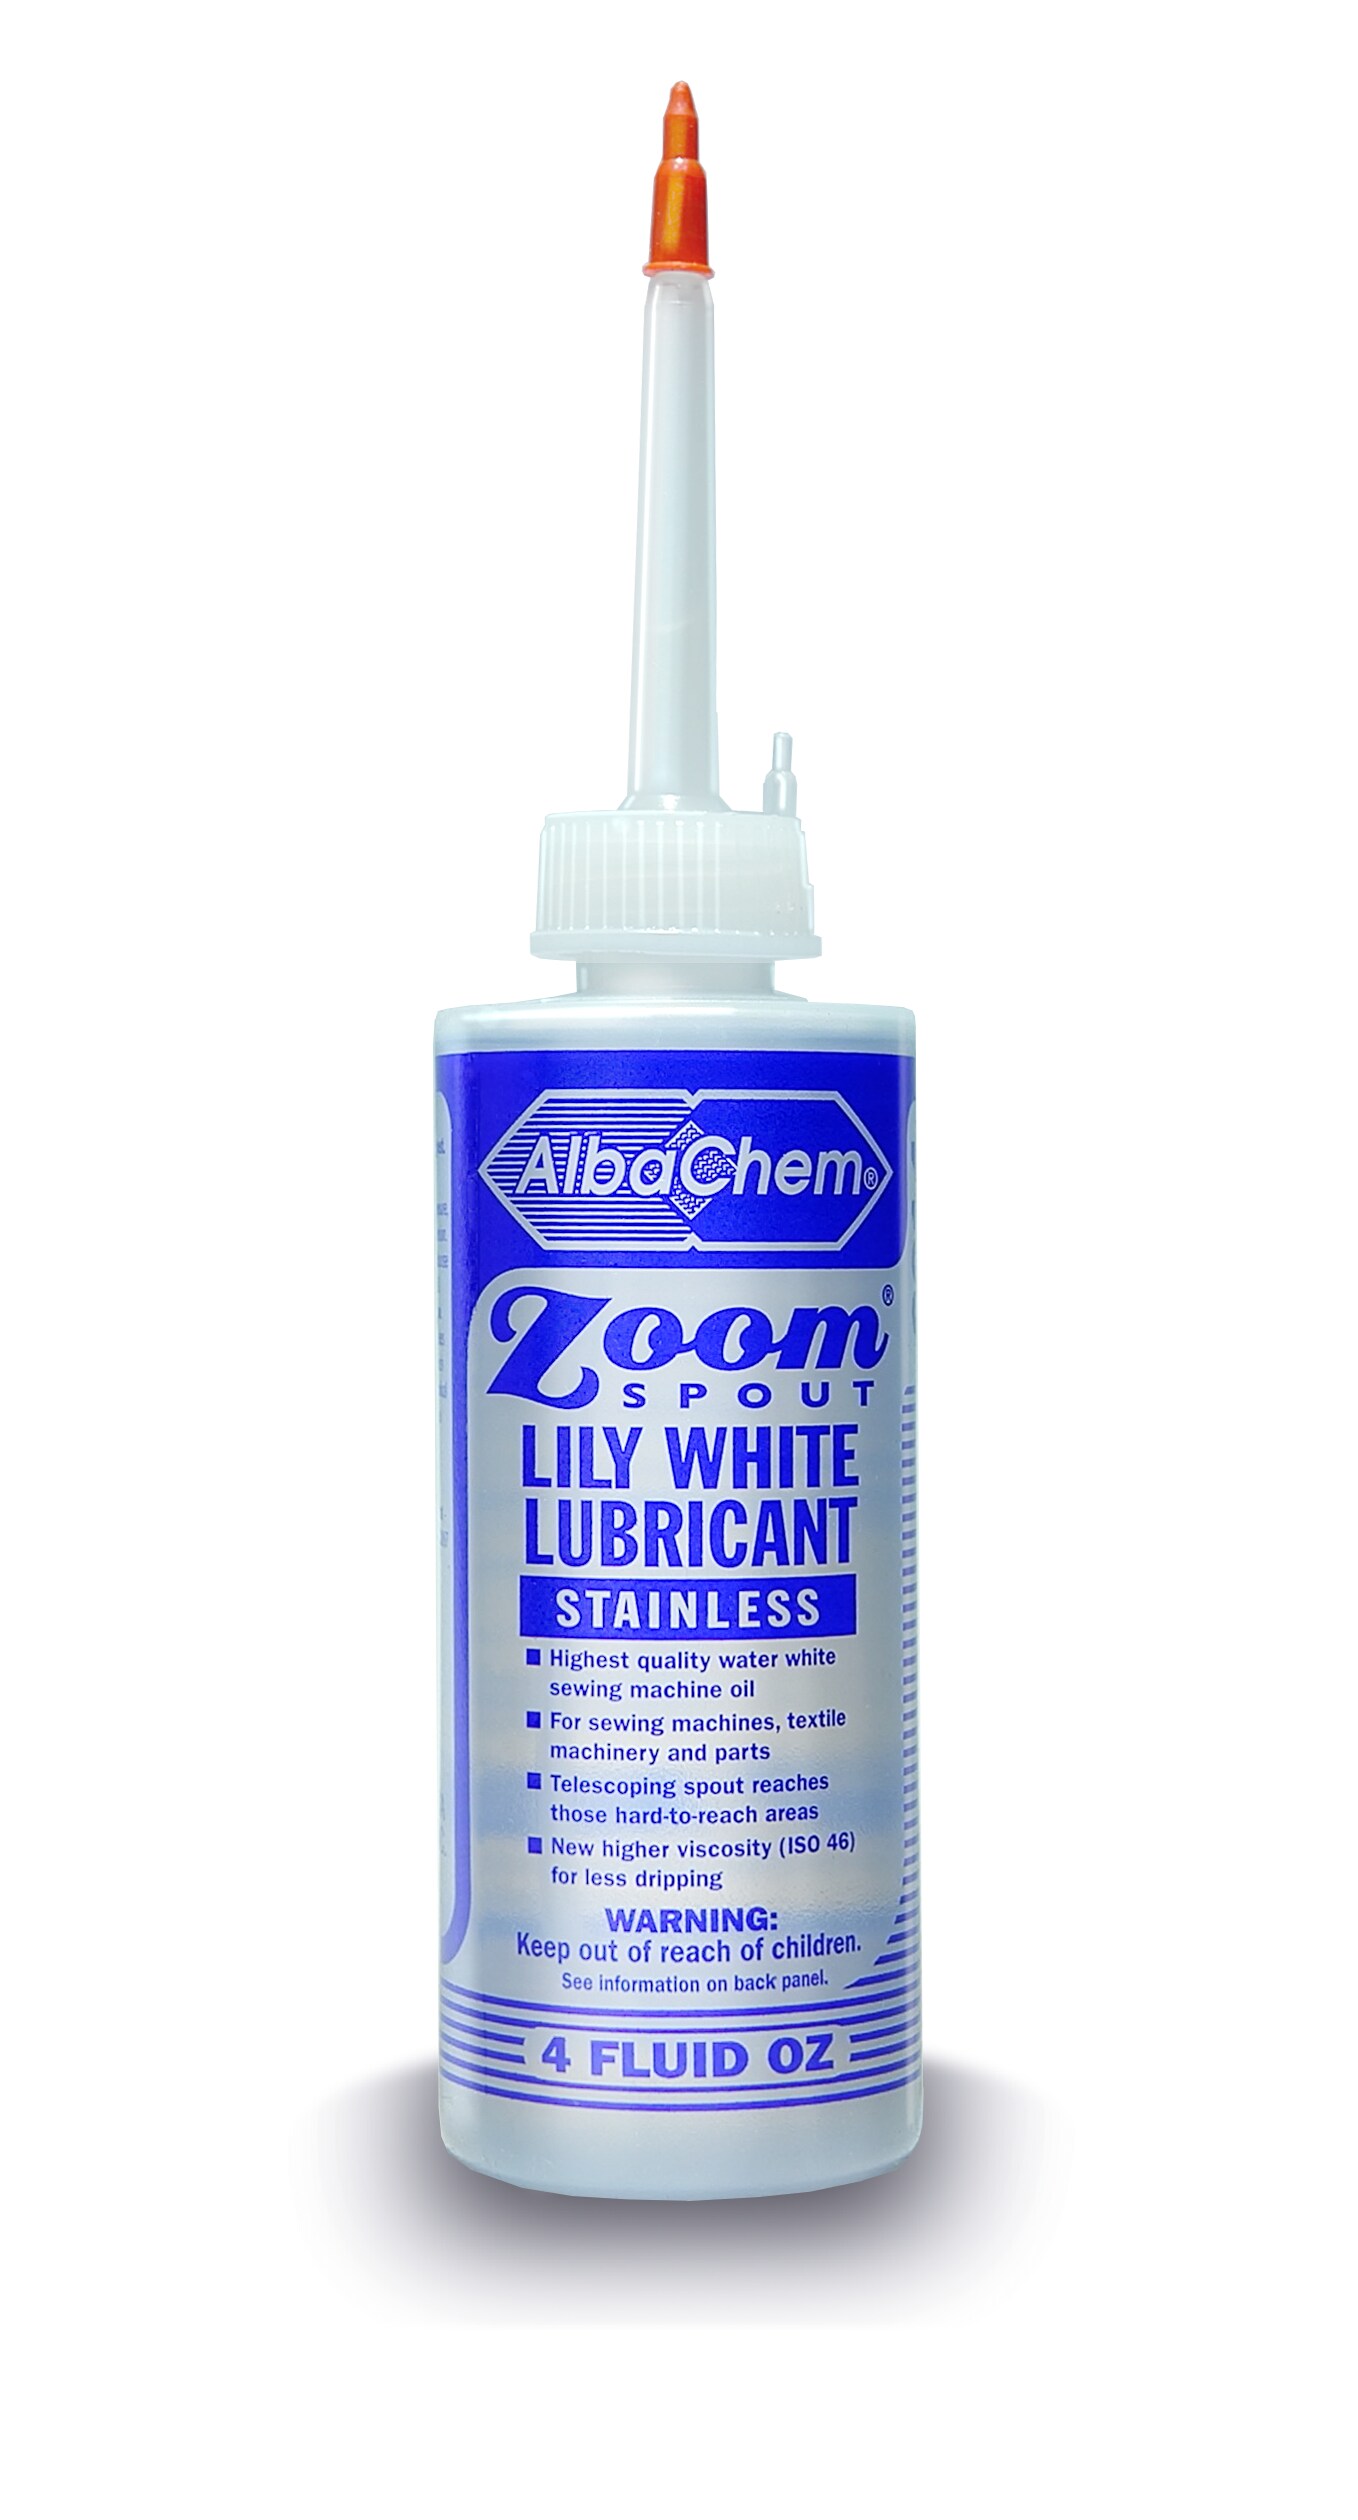 Zoom Spout Lilly White Stainless Sewing Machine Oil